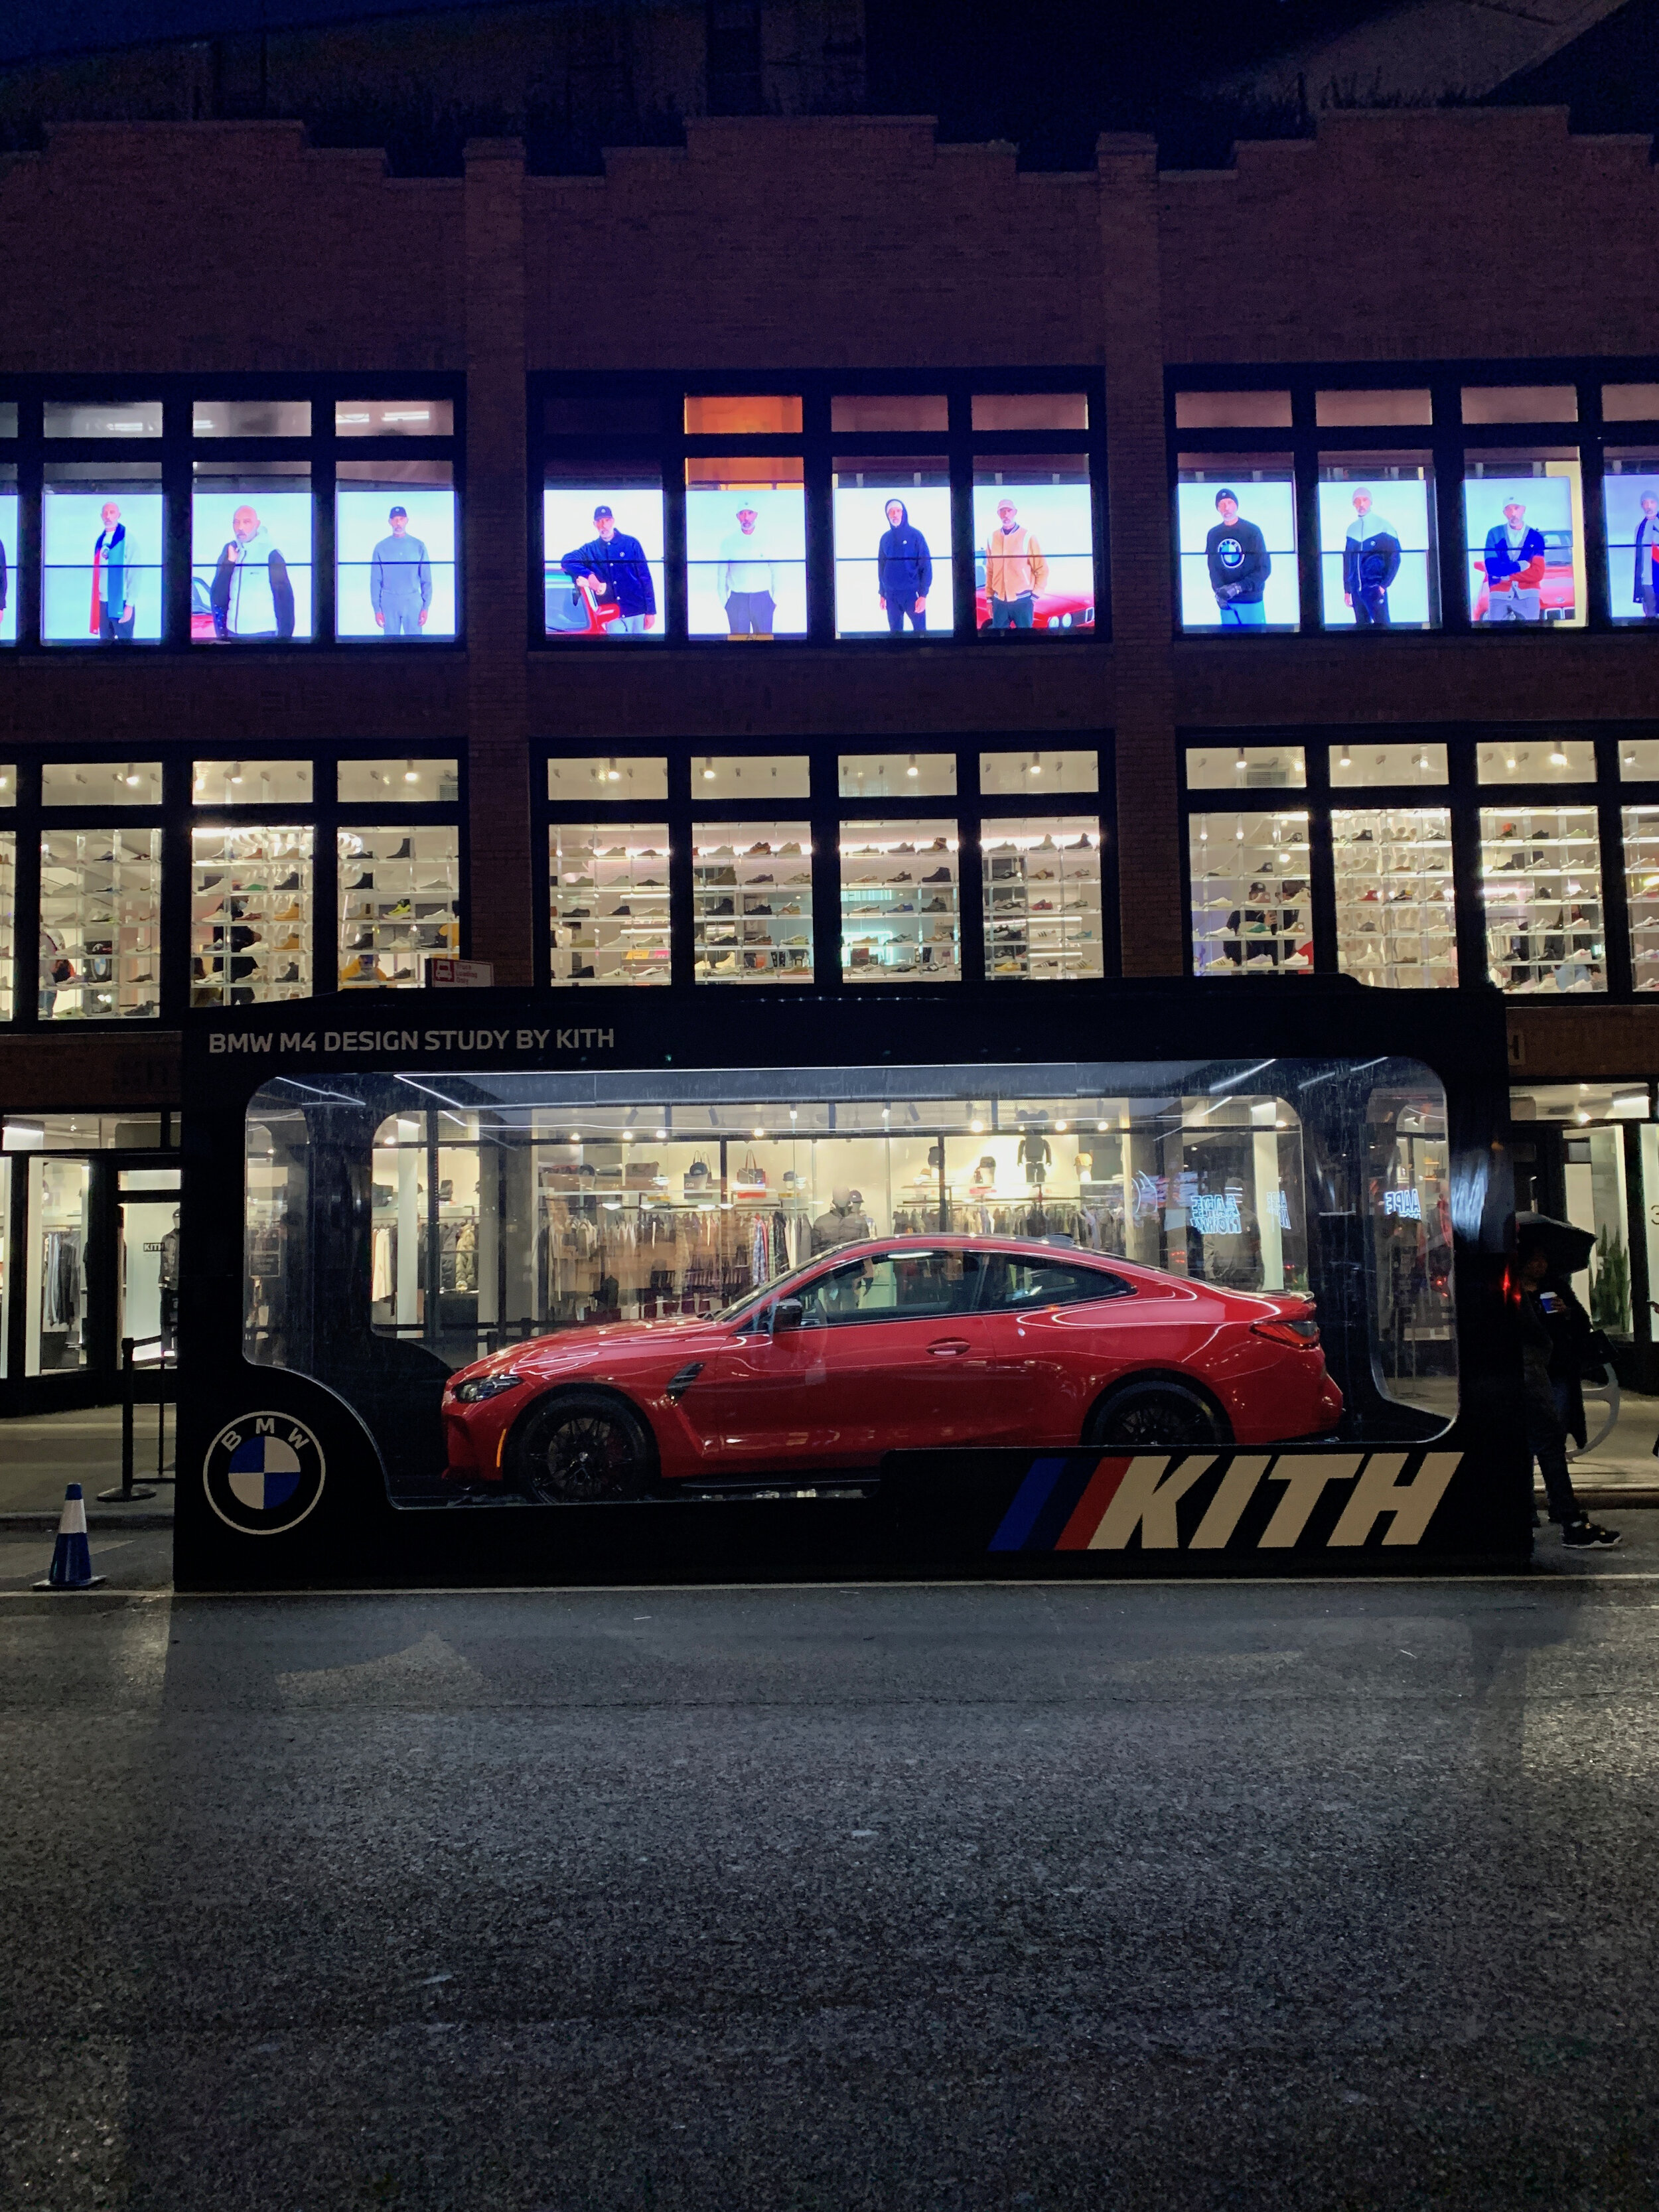  In collaboration with a scenic shop, we designed how to light a car in the traditional style of car commercial photography, except the car was in a plexiglass box on a NYC street and could not have any cables running to it.  A really special NYC tre